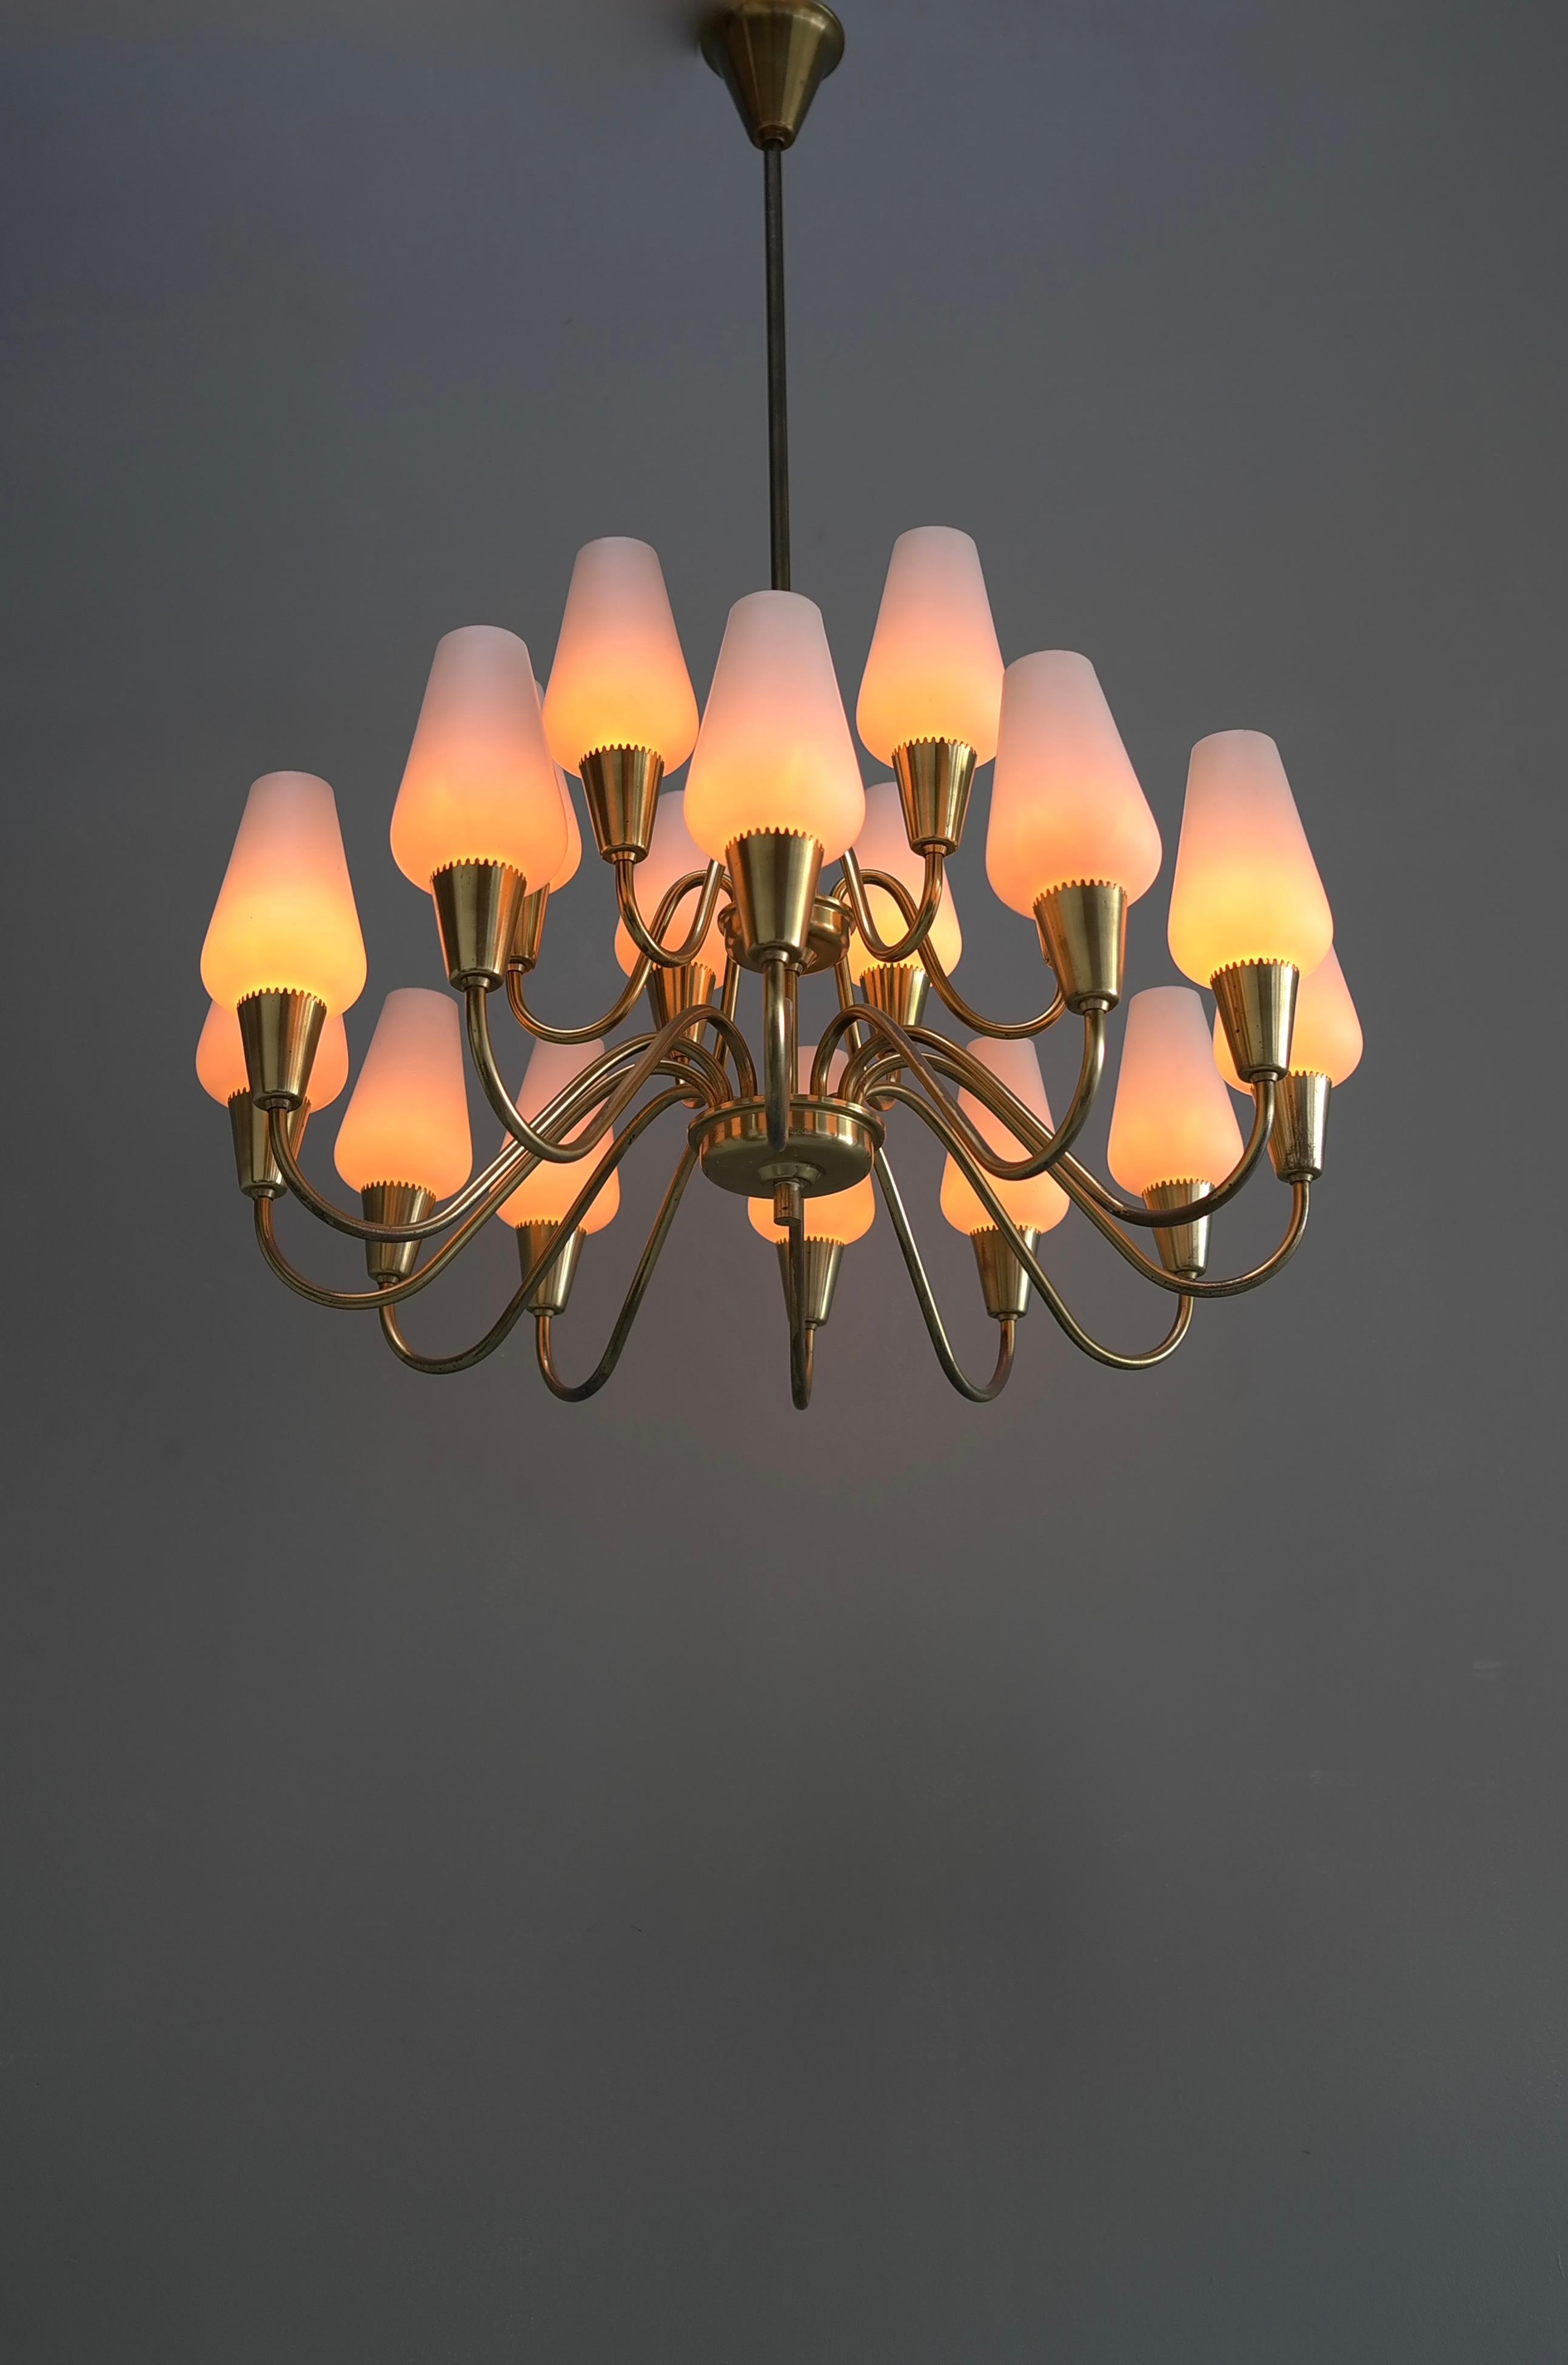 Mid-20th Century Opaline Glass and Brass Chandelier by Bent Karlby for Lyfa, Denmark 1960s For Sale